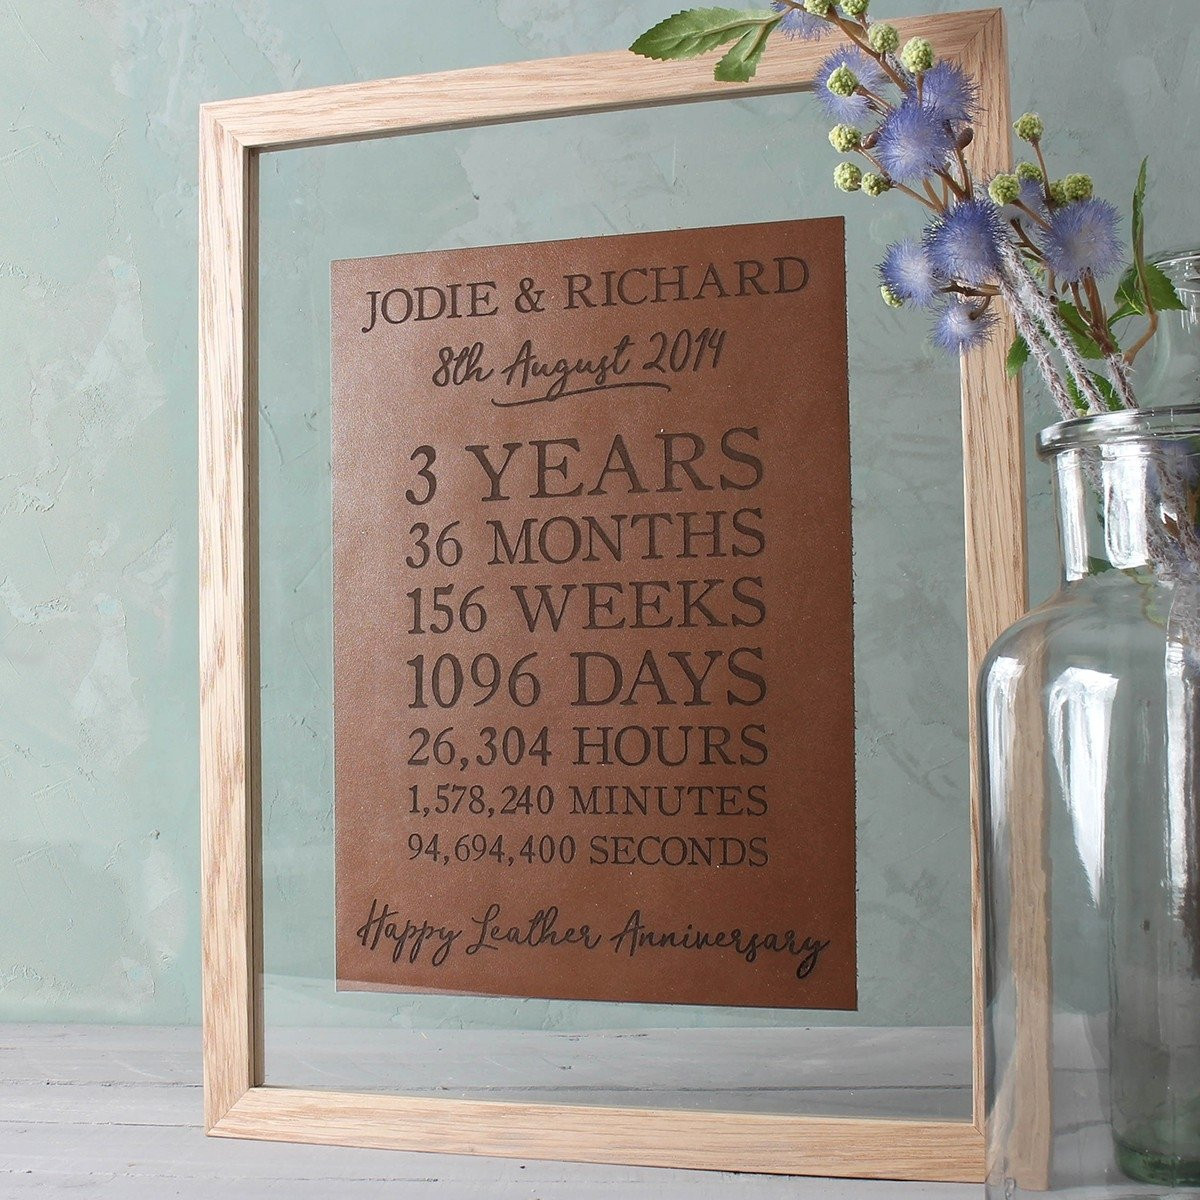 18 Year Wedding Anniversary Gift Ideas For Her
 10 Elegant 3Rd Year Anniversary Gift Ideas For Her 2019